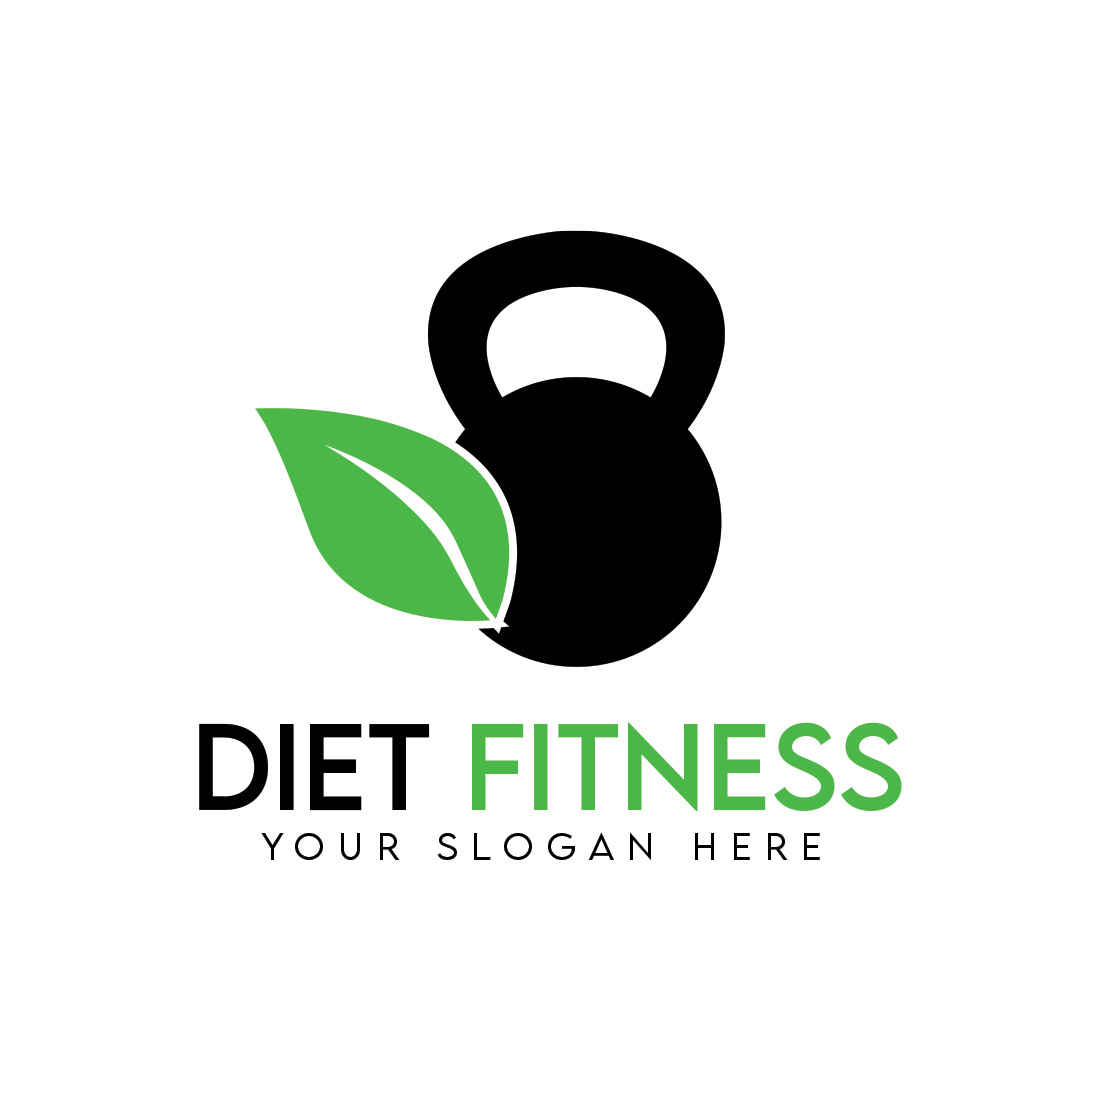 Fitness Diet Logo Template cover image.